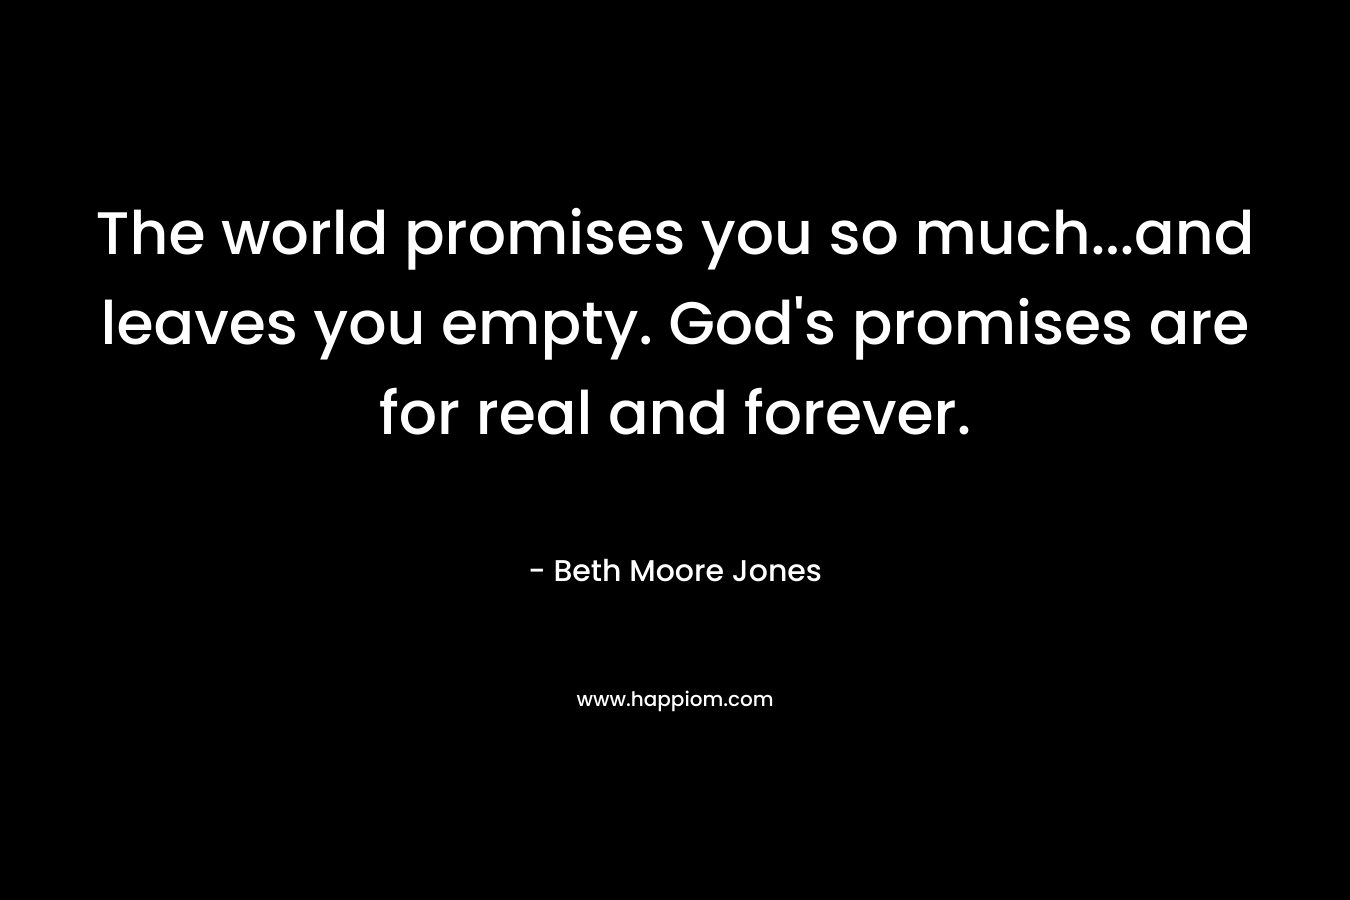 The world promises you so much...and leaves you empty. God's promises are for real and forever.